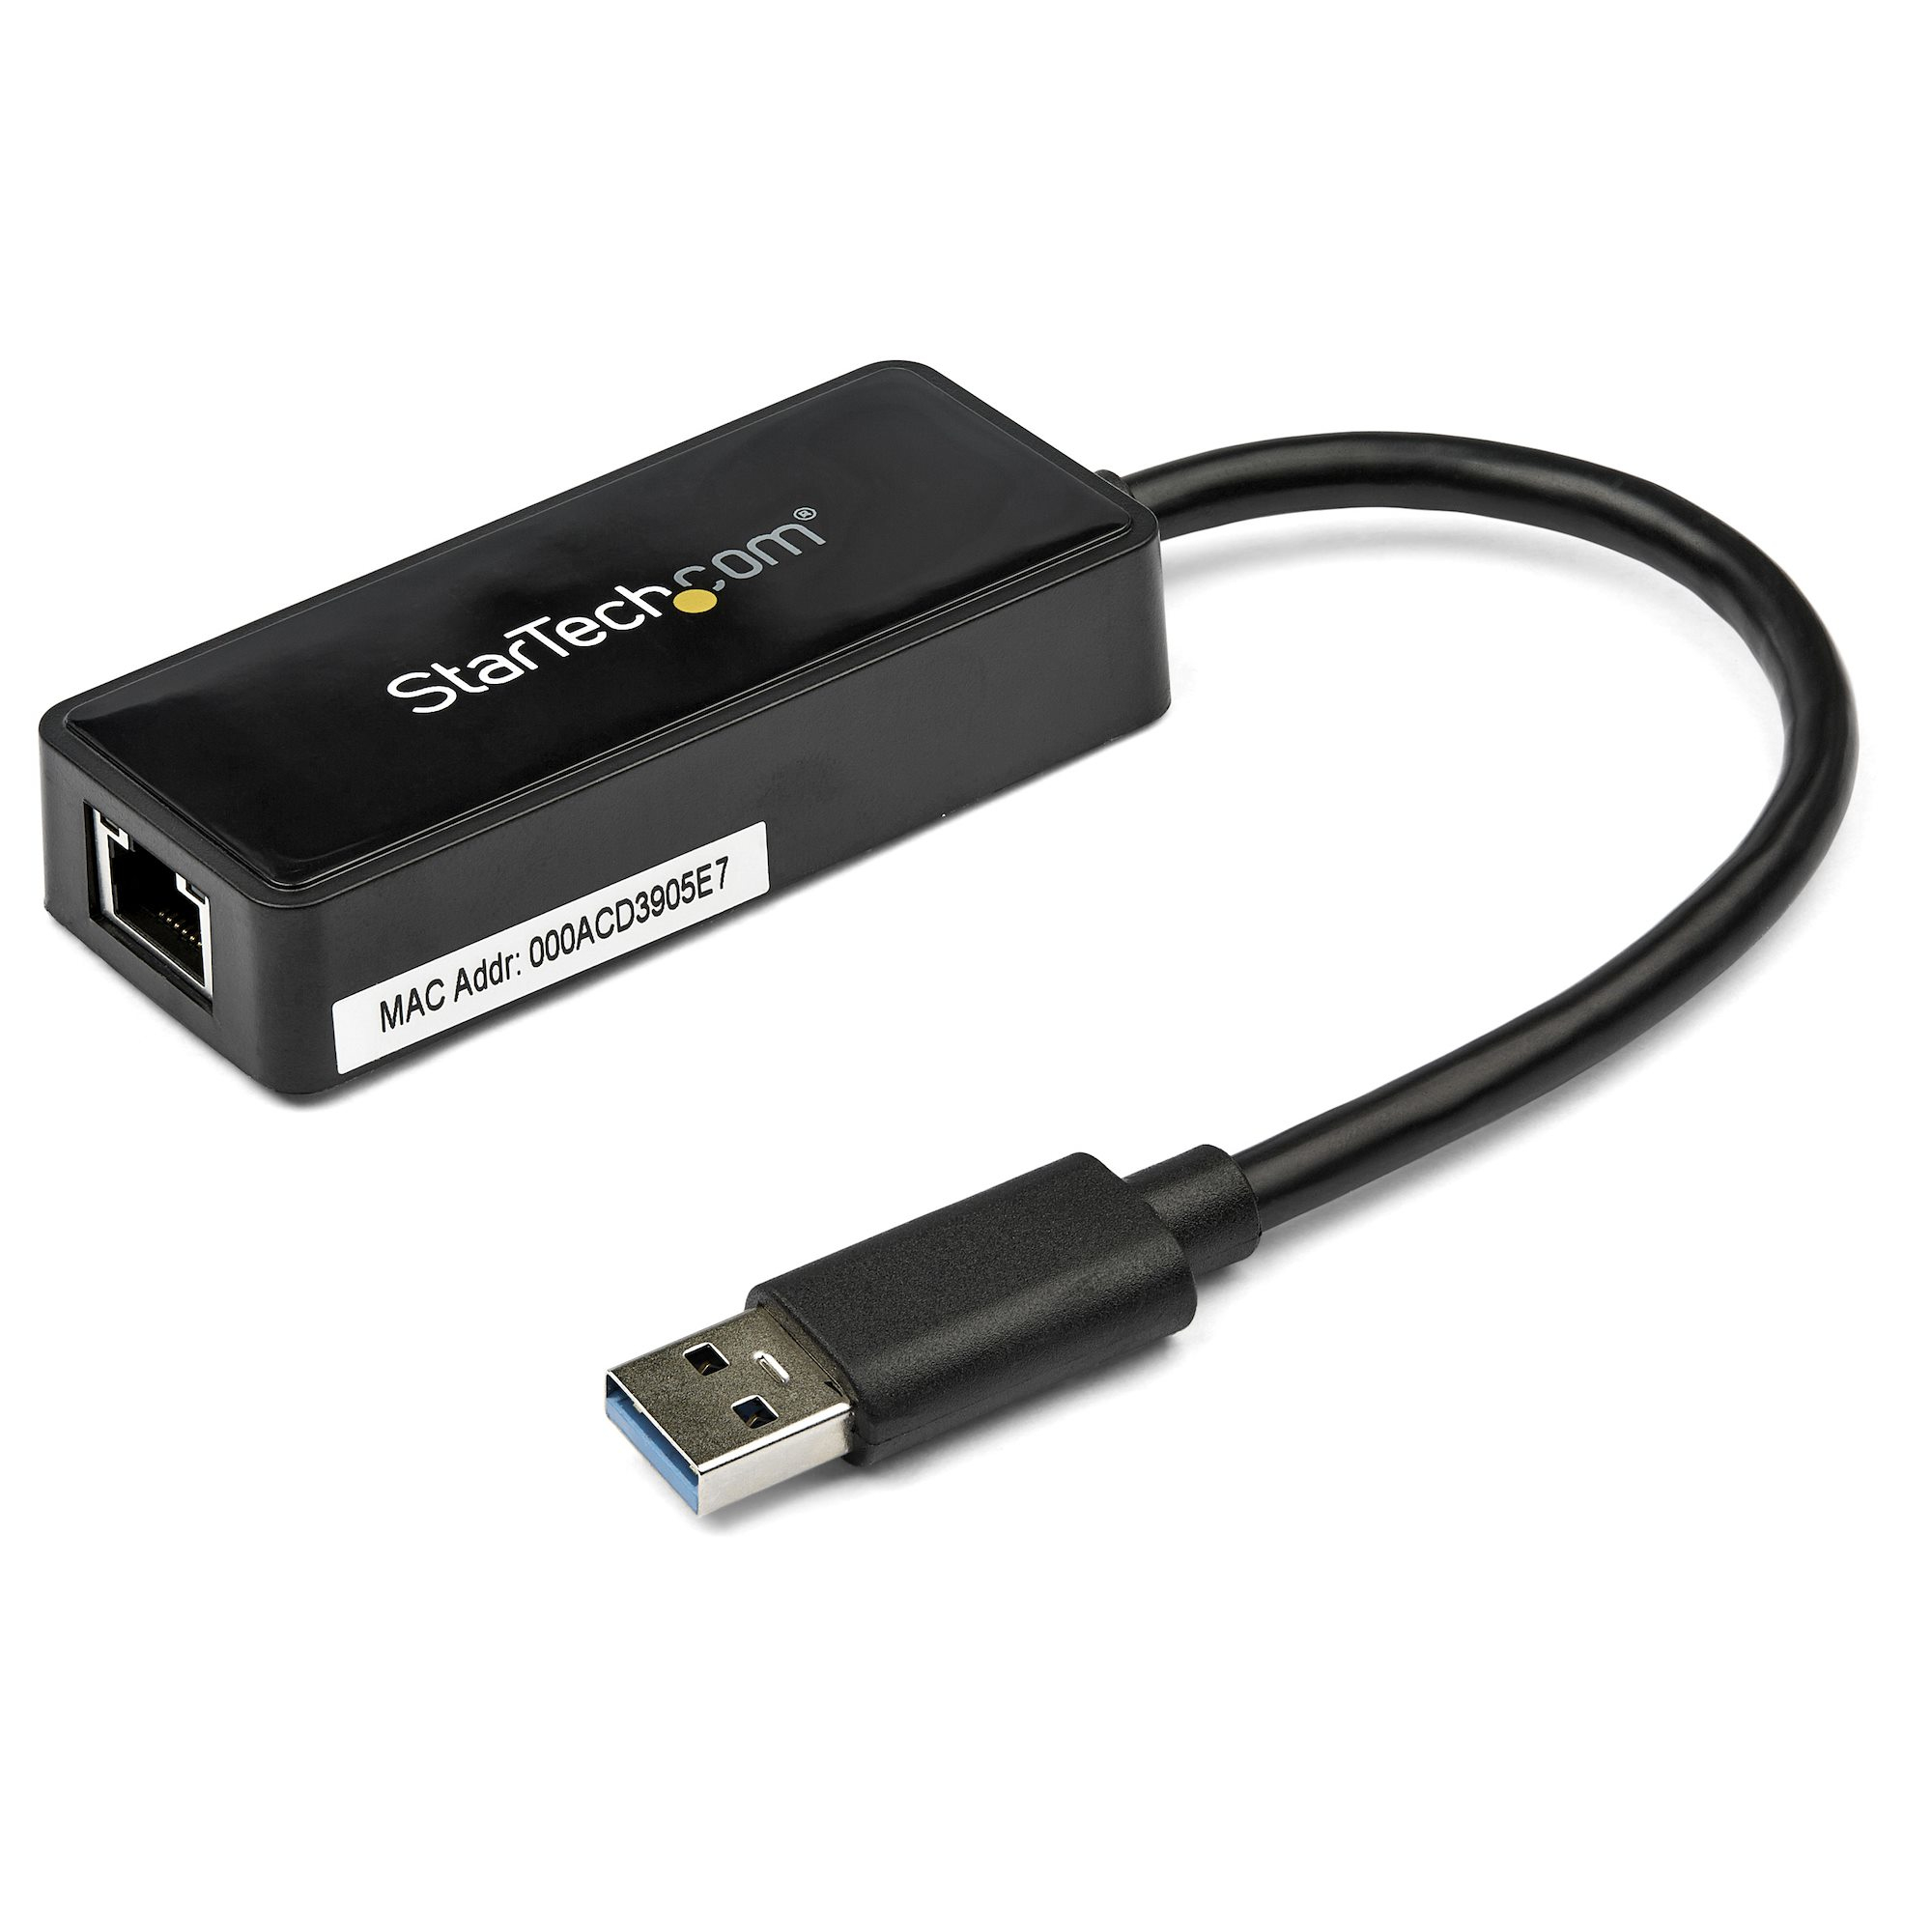 can mac ethernet work with usb adapter